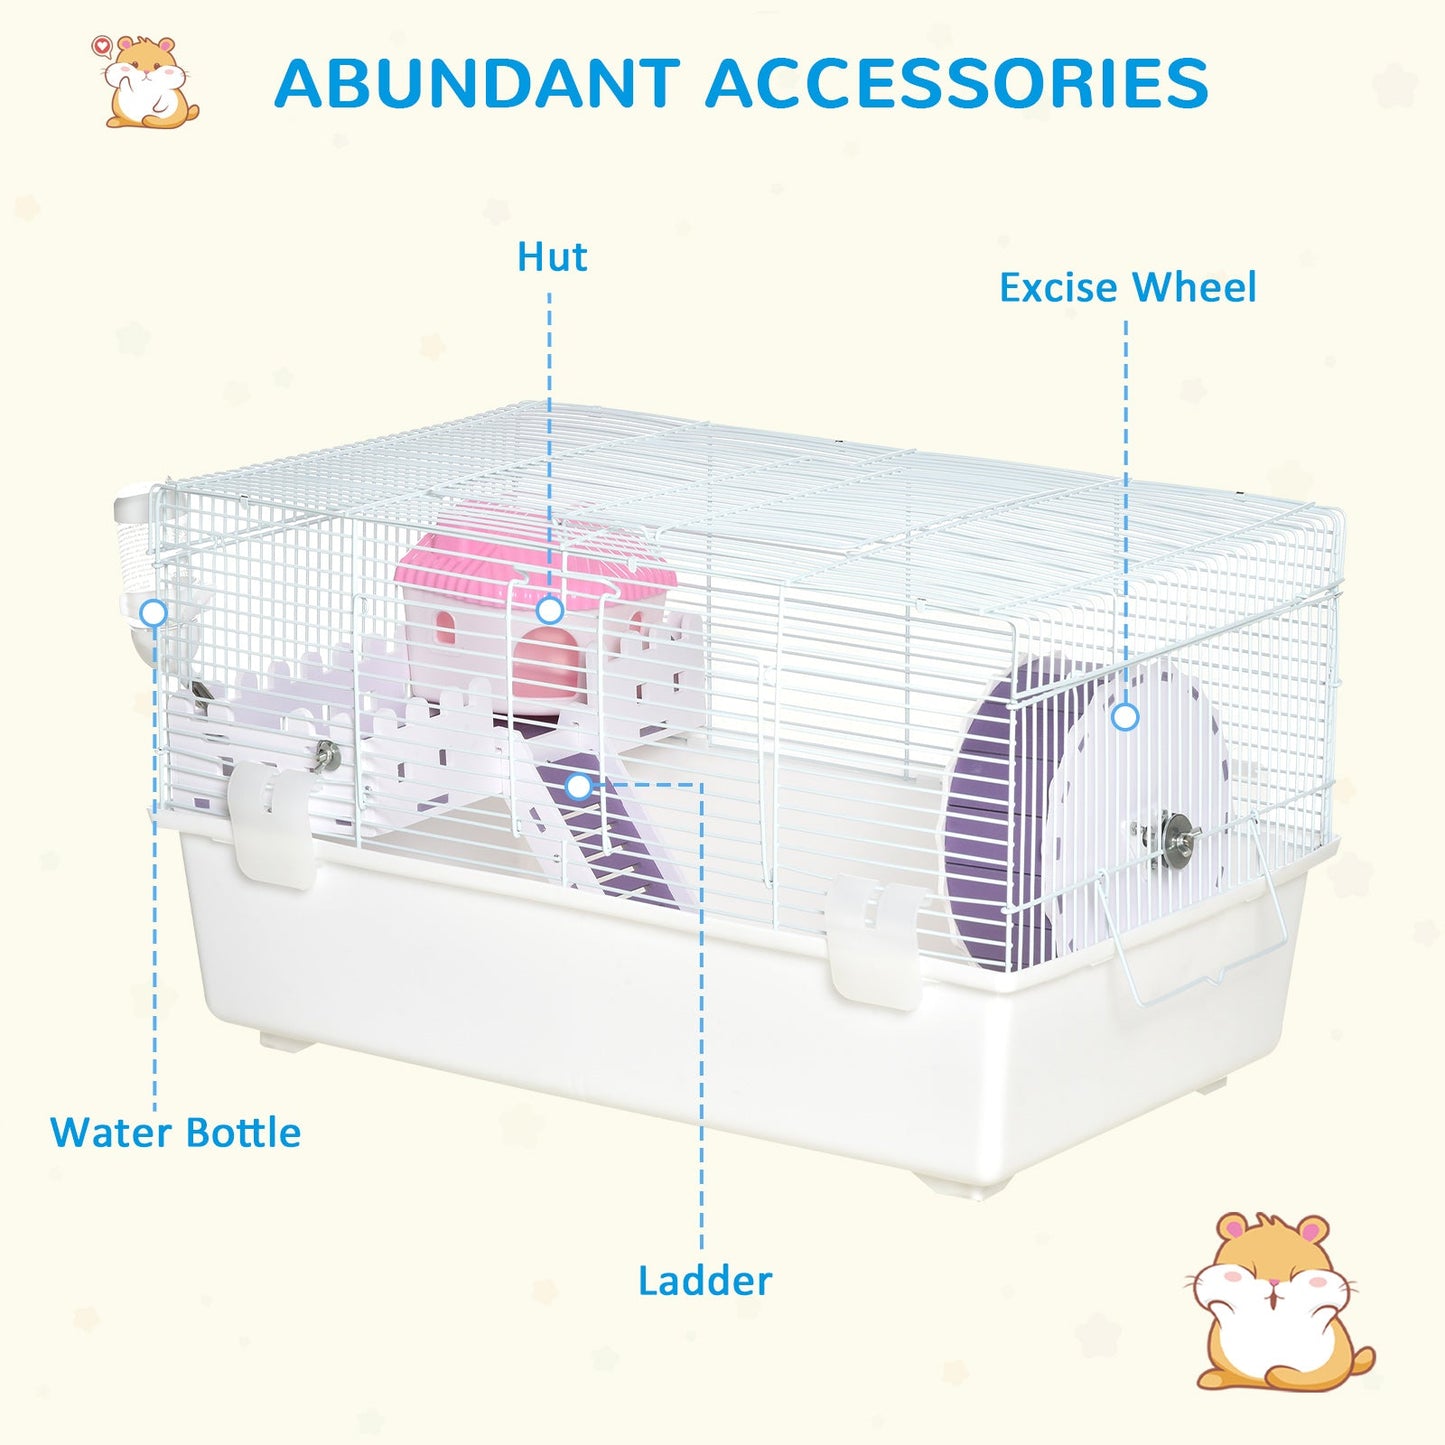 AOSOM-2 Tier Hamster Cage, Multi-Storey Rodent House Small Animal Habitat with Water Bottle, Excise Wheel, Ladder, Hut, White - Outdoor Style Company